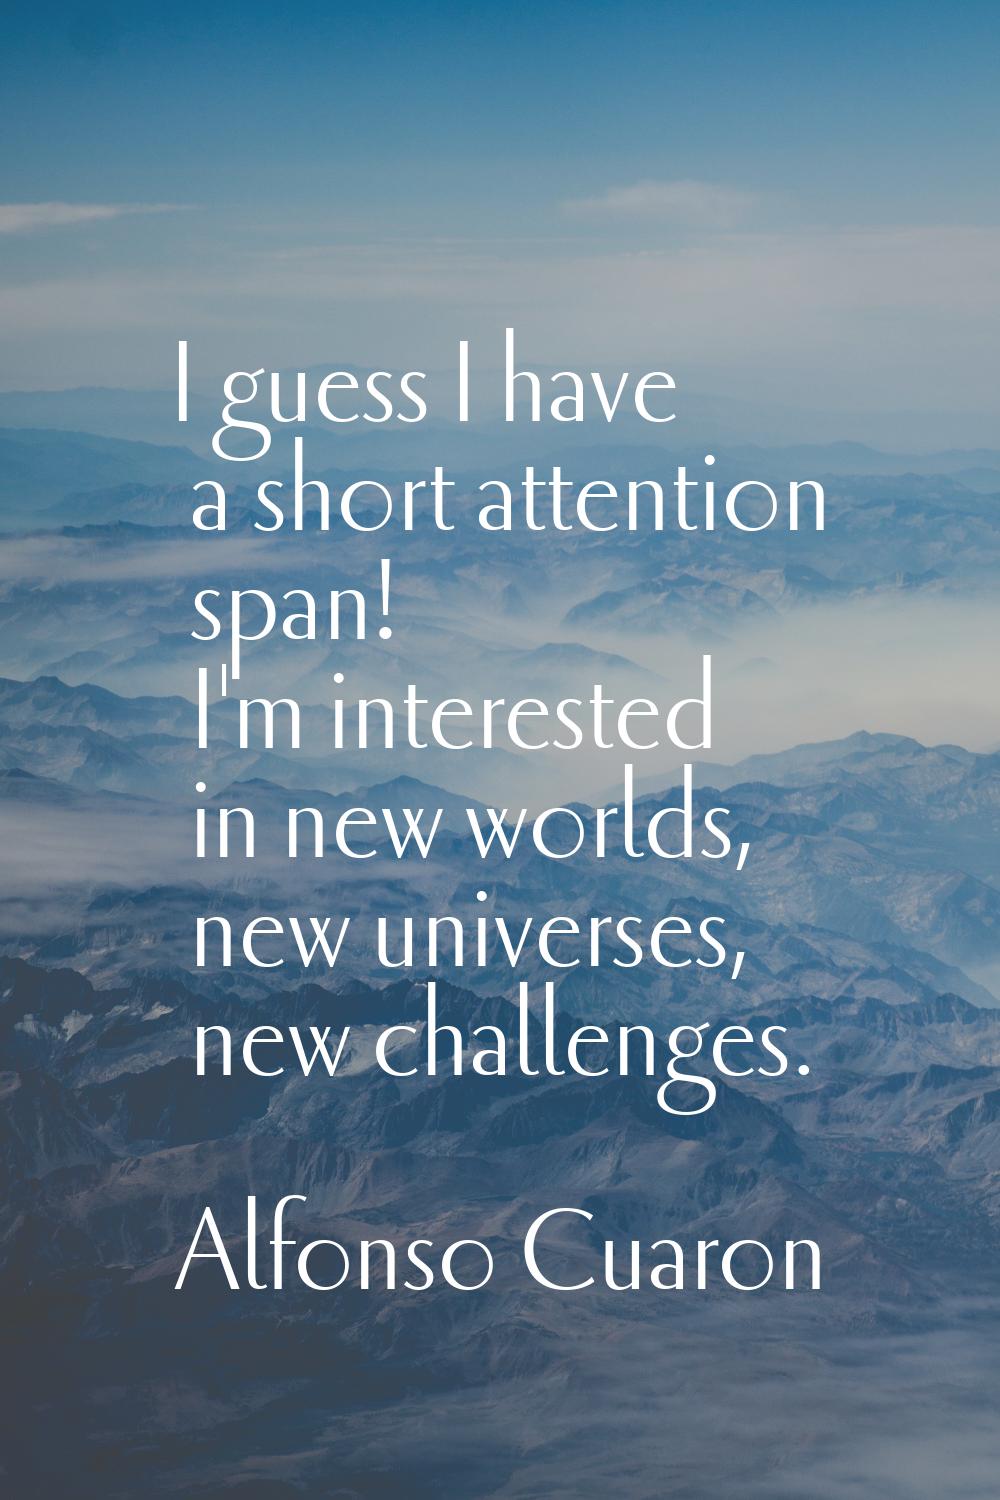 I guess I have a short attention span! I'm interested in new worlds, new universes, new challenges.